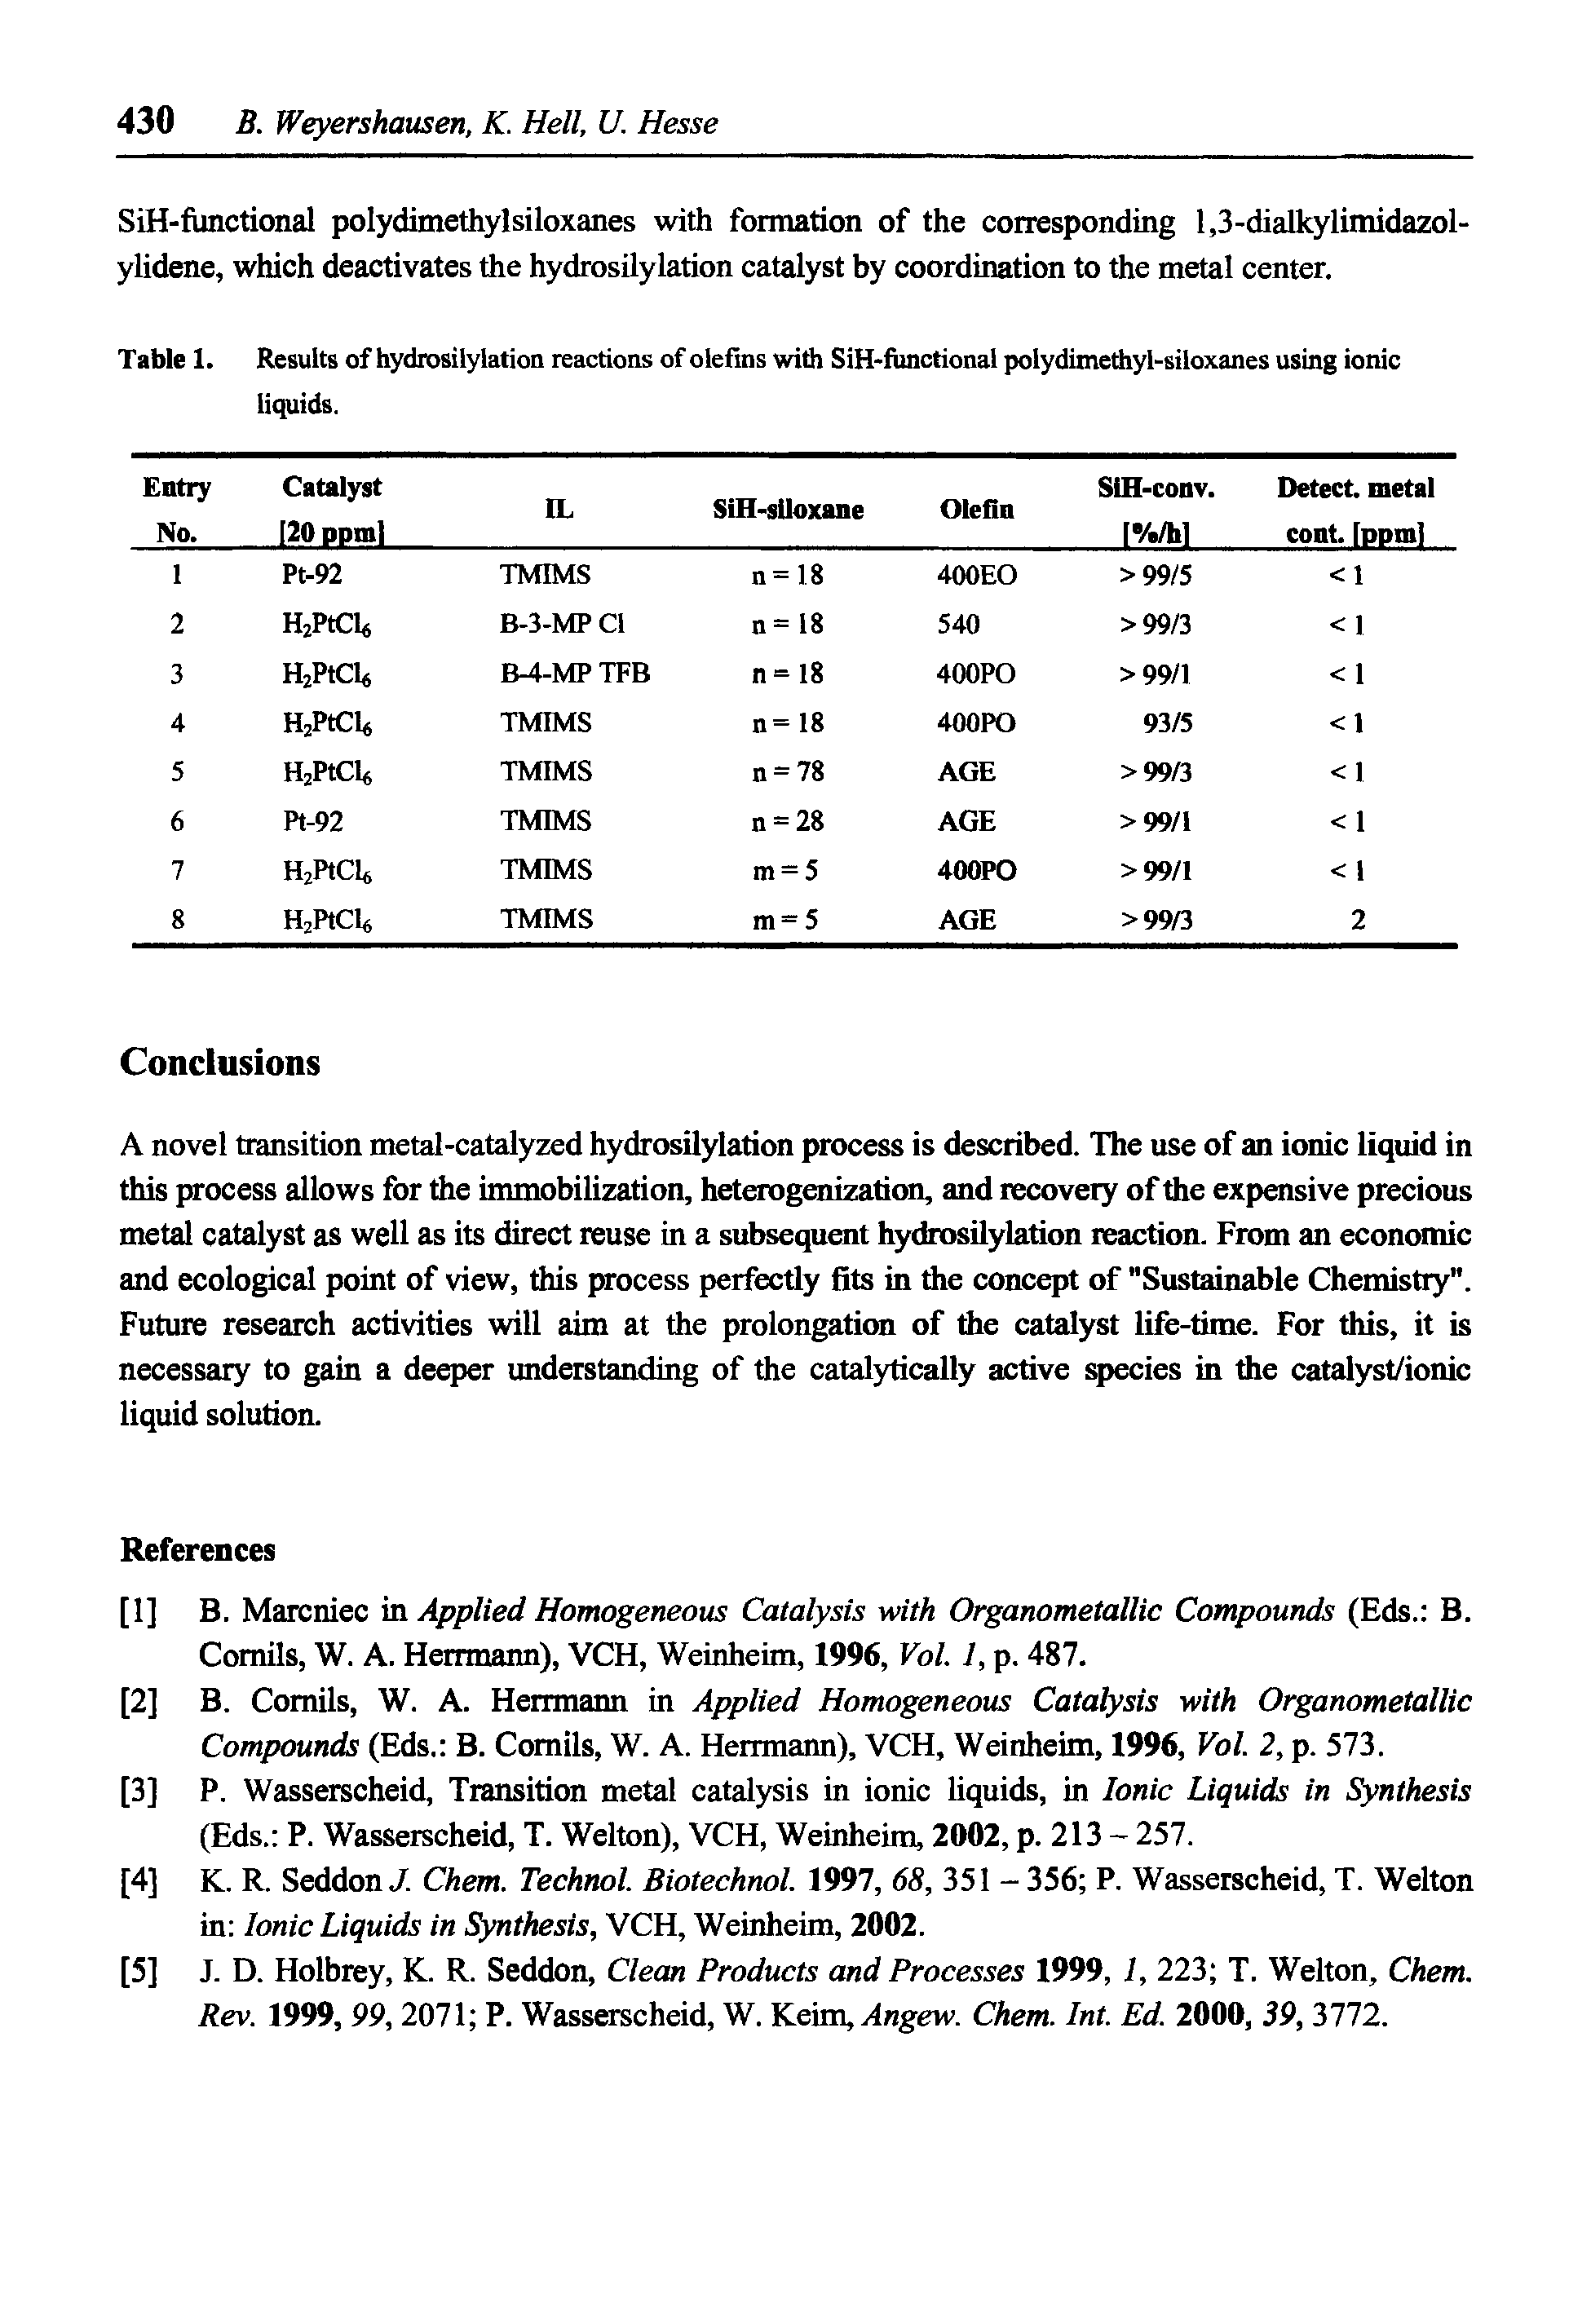 Table 1. Results of hydrosilylation reactions of olefins with SiH-functional polydimethyl-siloxanes using ionic liquids.